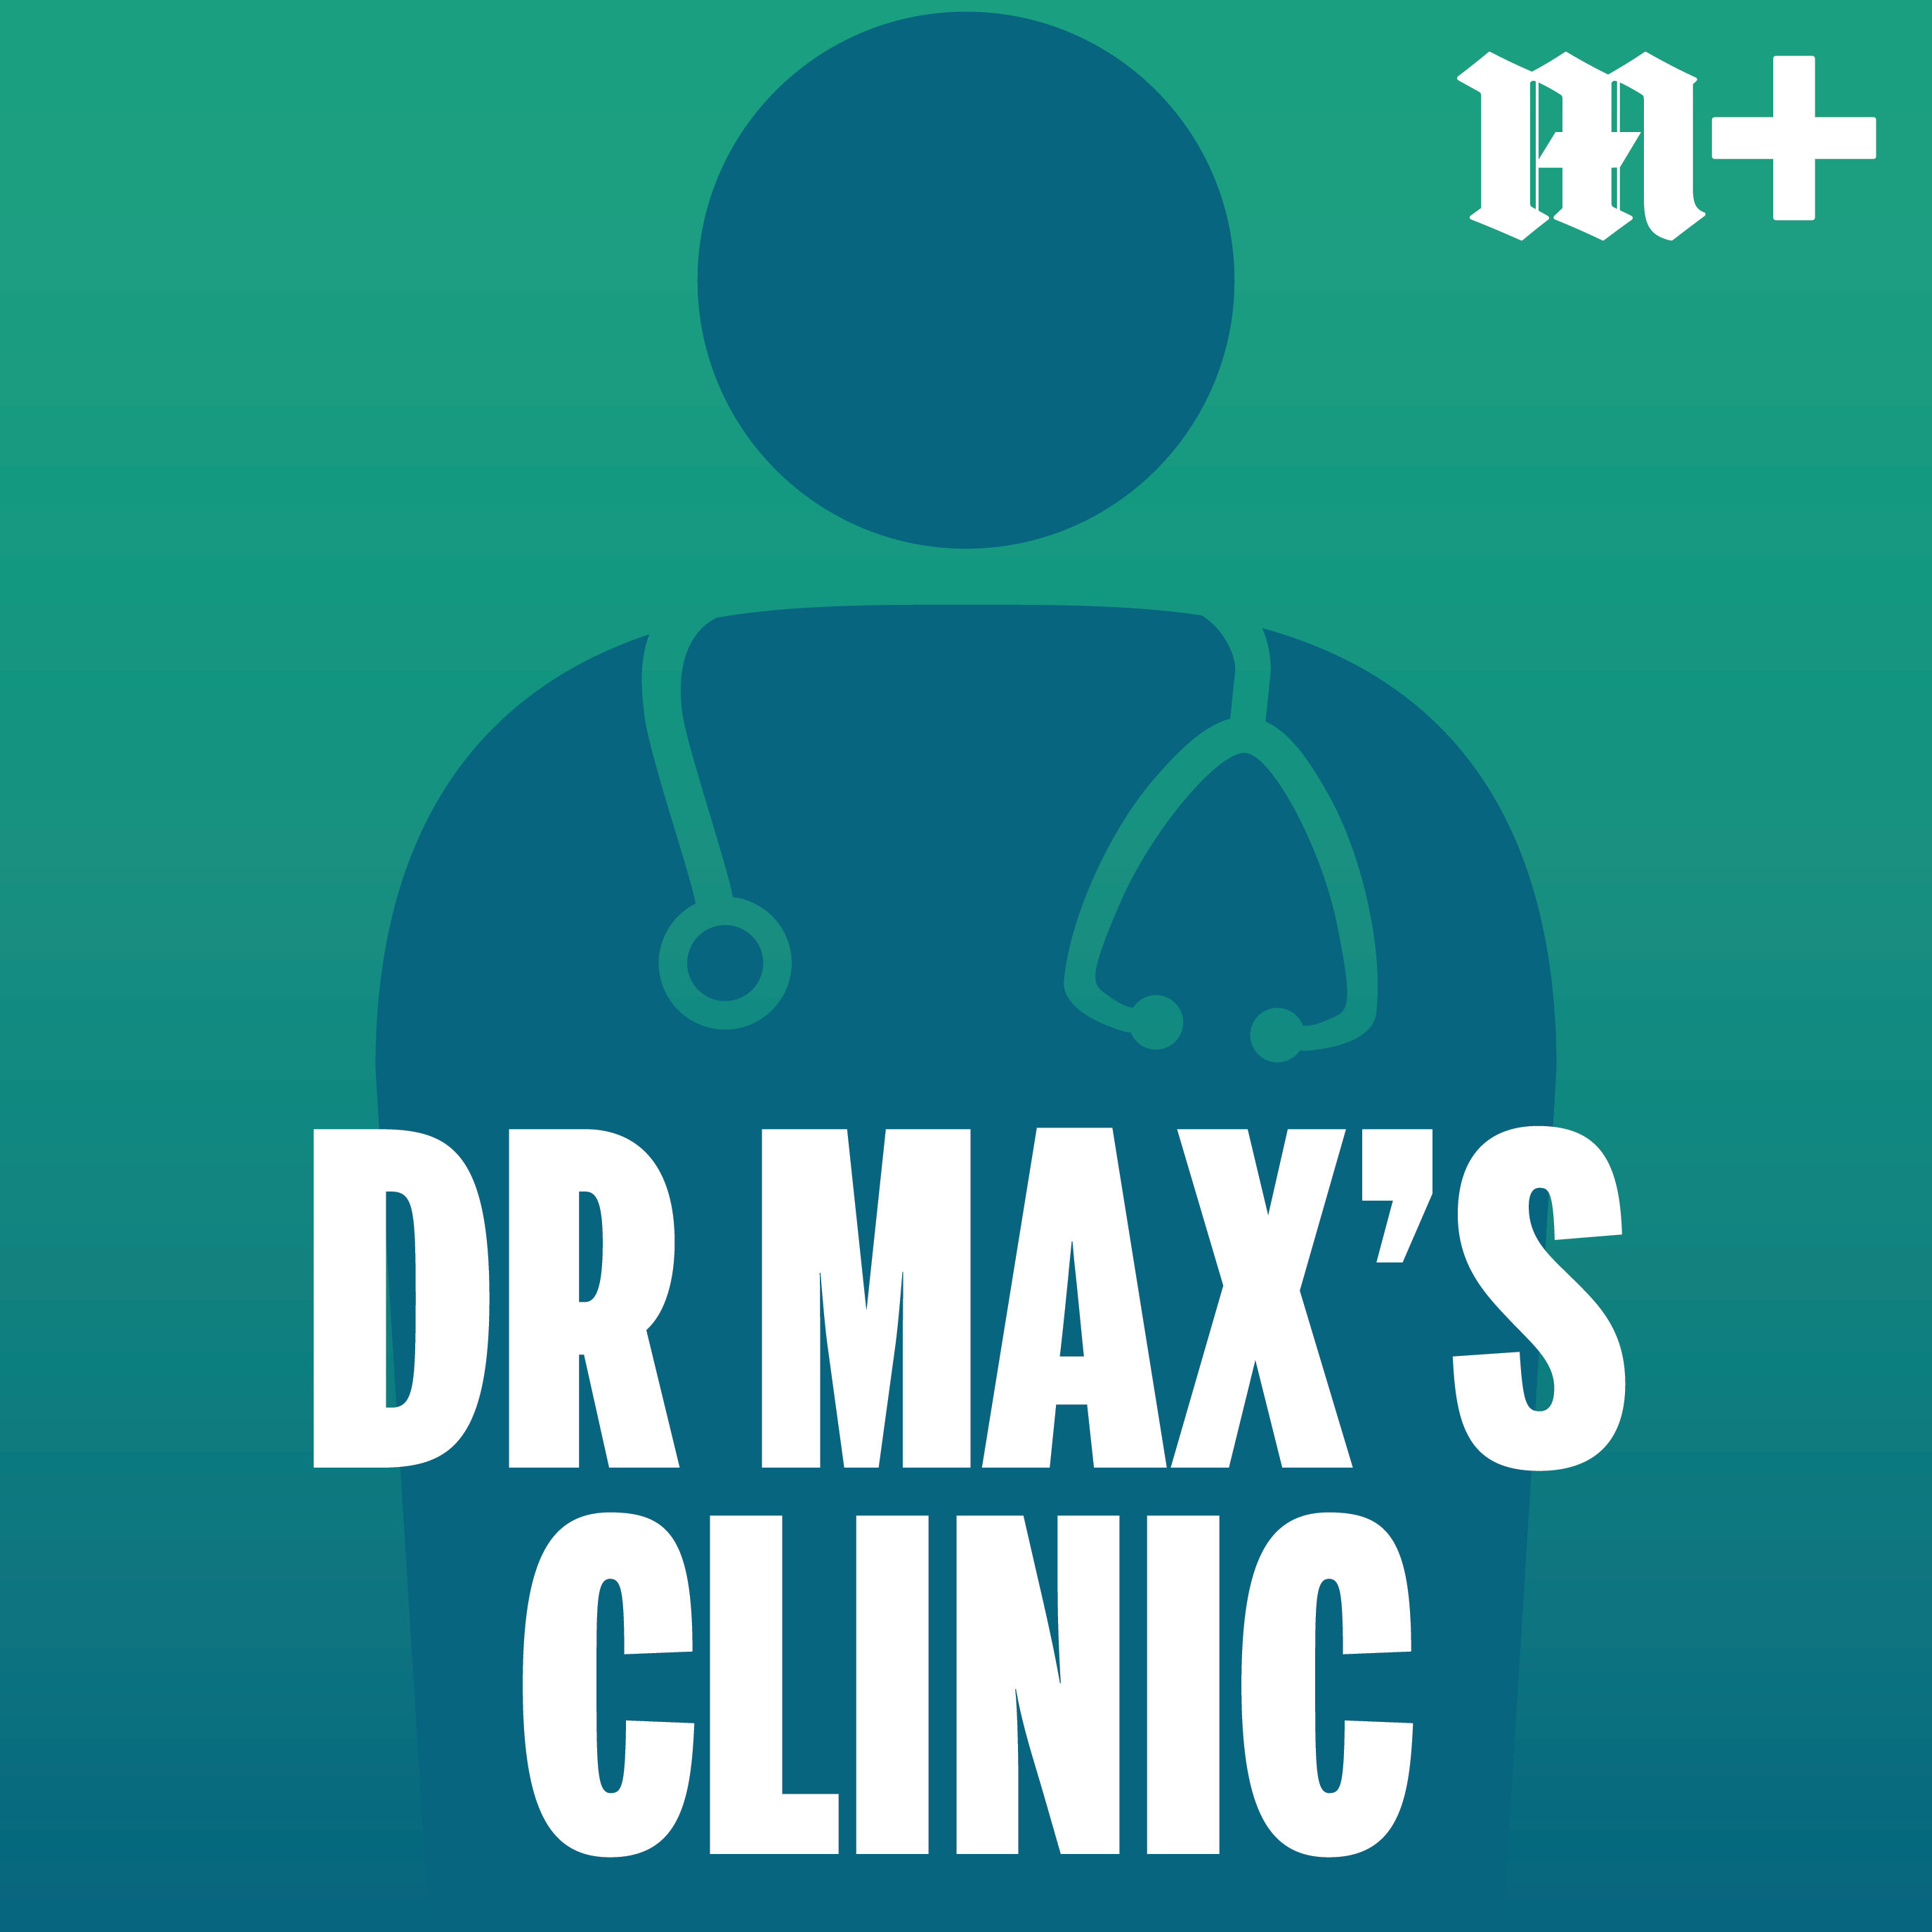 Dr Max's Clinic